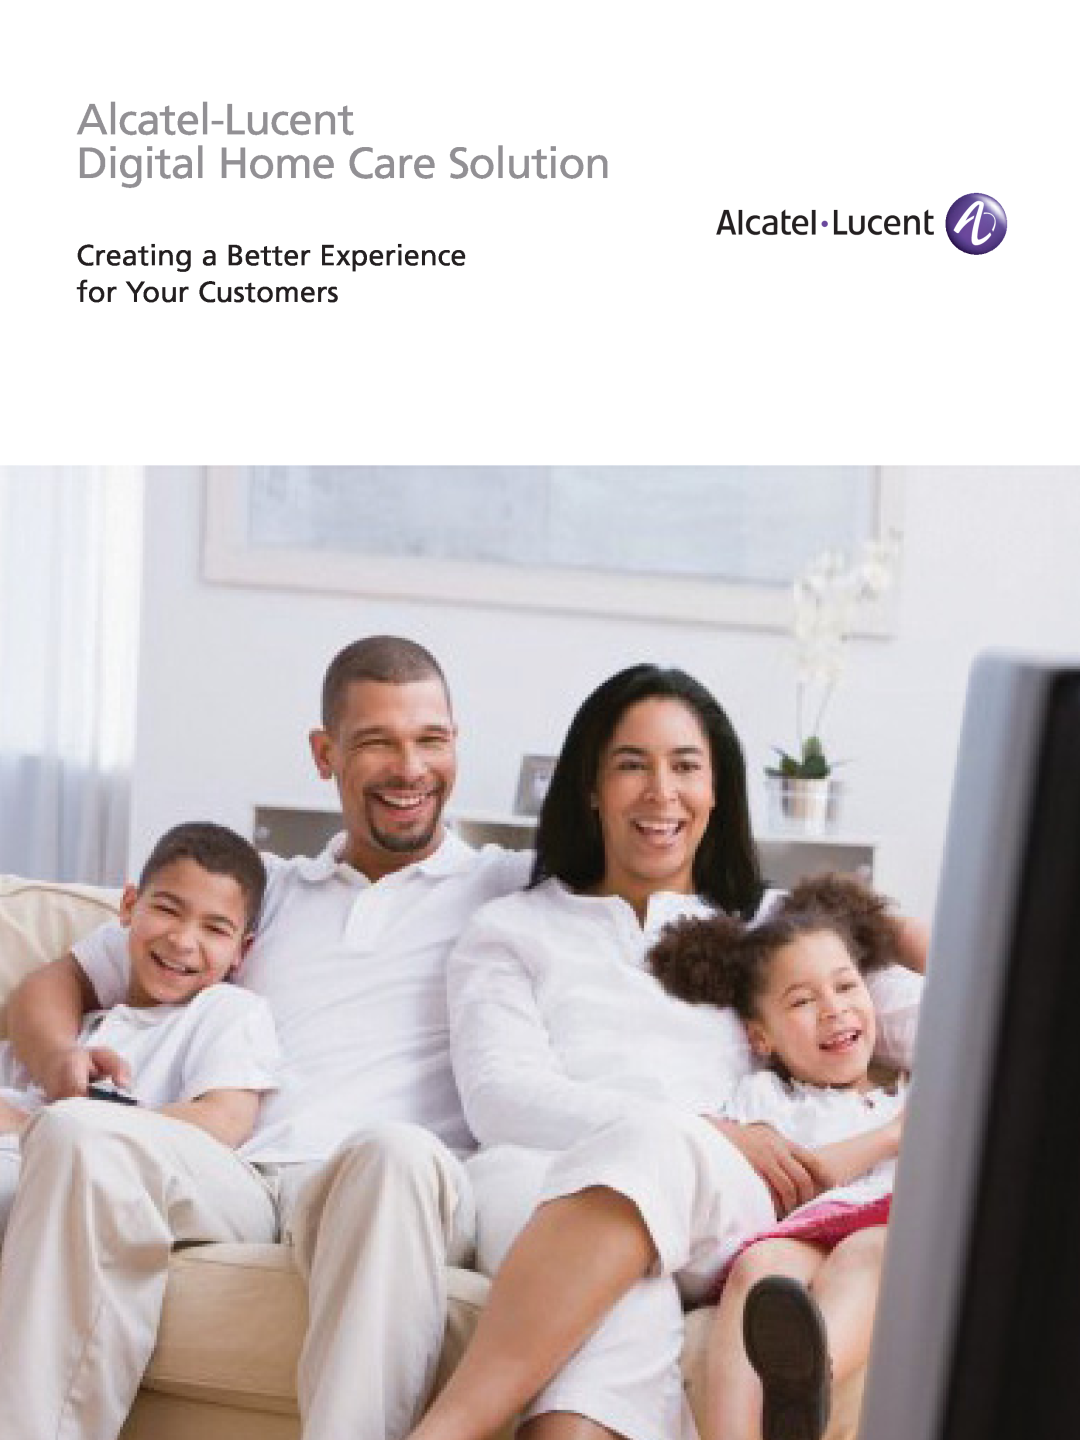 Alcatel-Lucent manual Alcatel-Lucent Digital Home Care Solution, Creating a Better Experience for Your Customers 